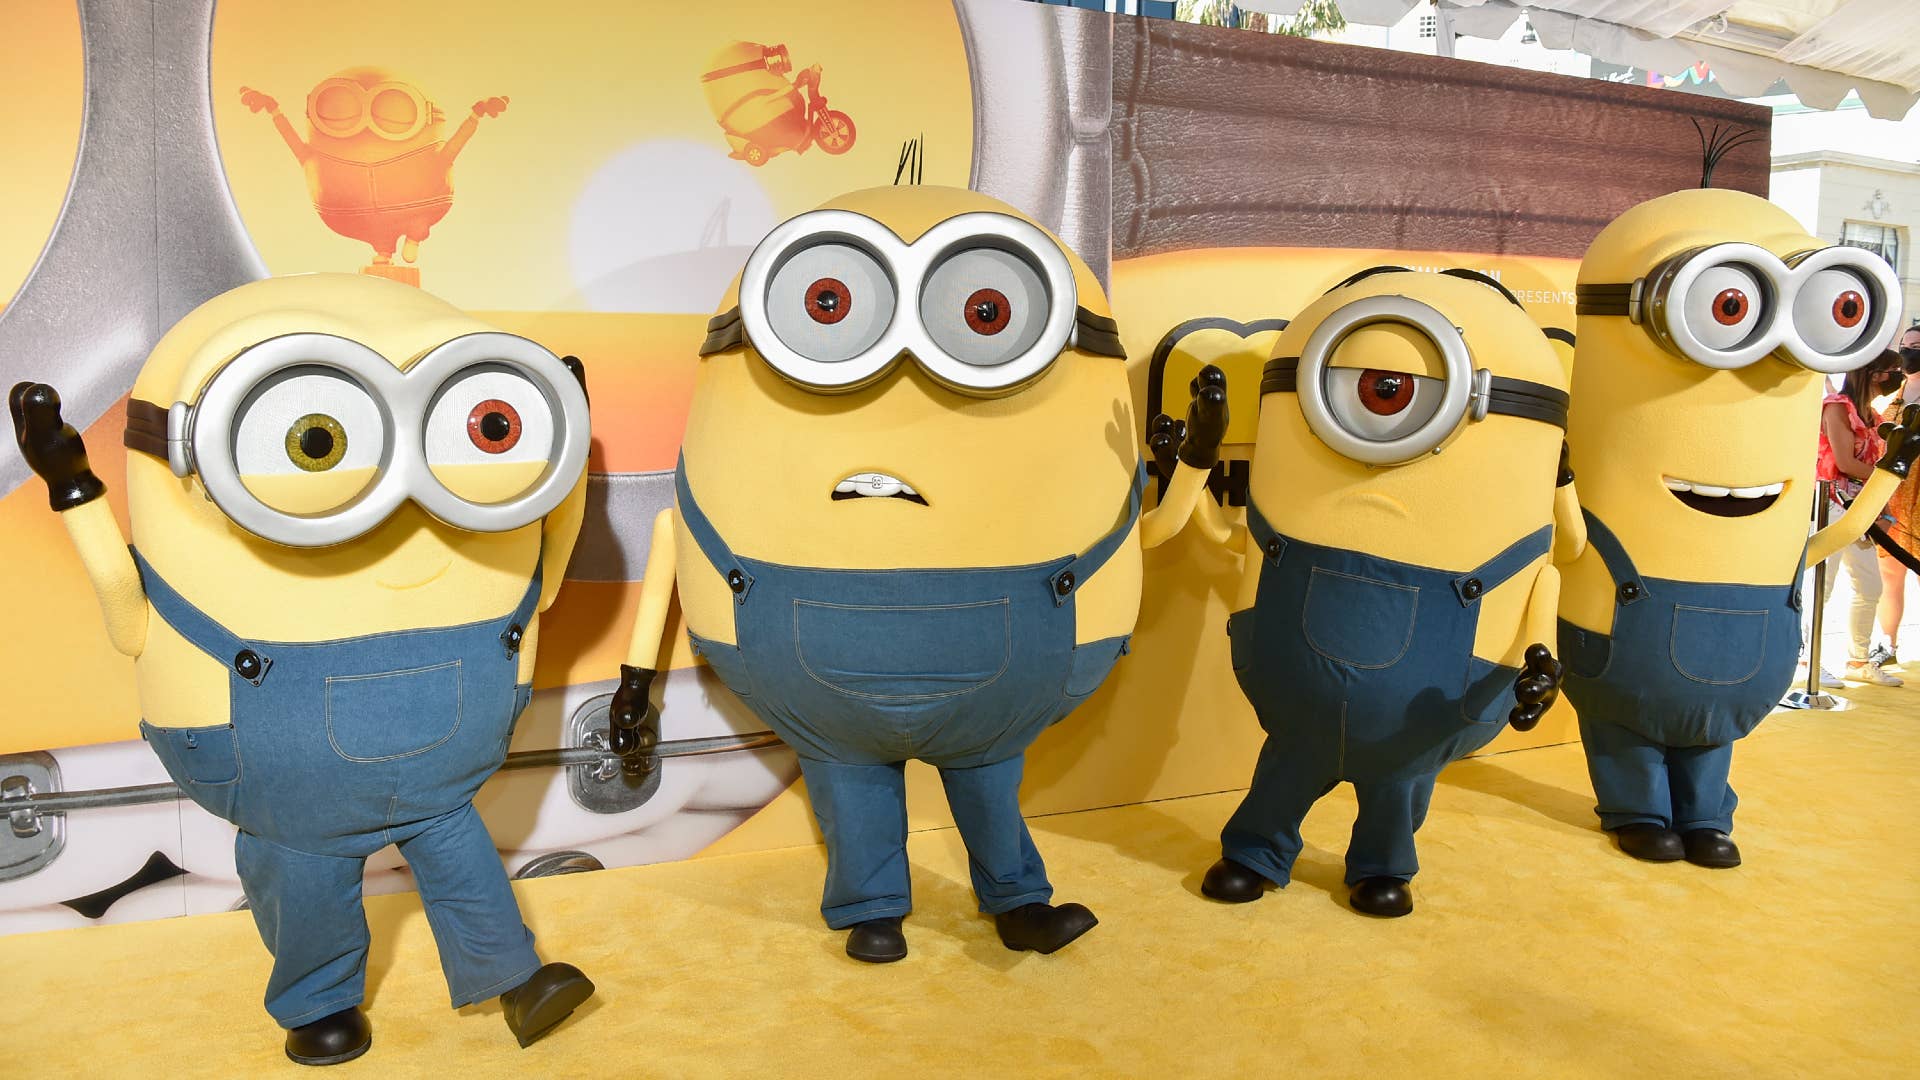 How the Minions from 'Despicable Me' Took Over Internet Culture